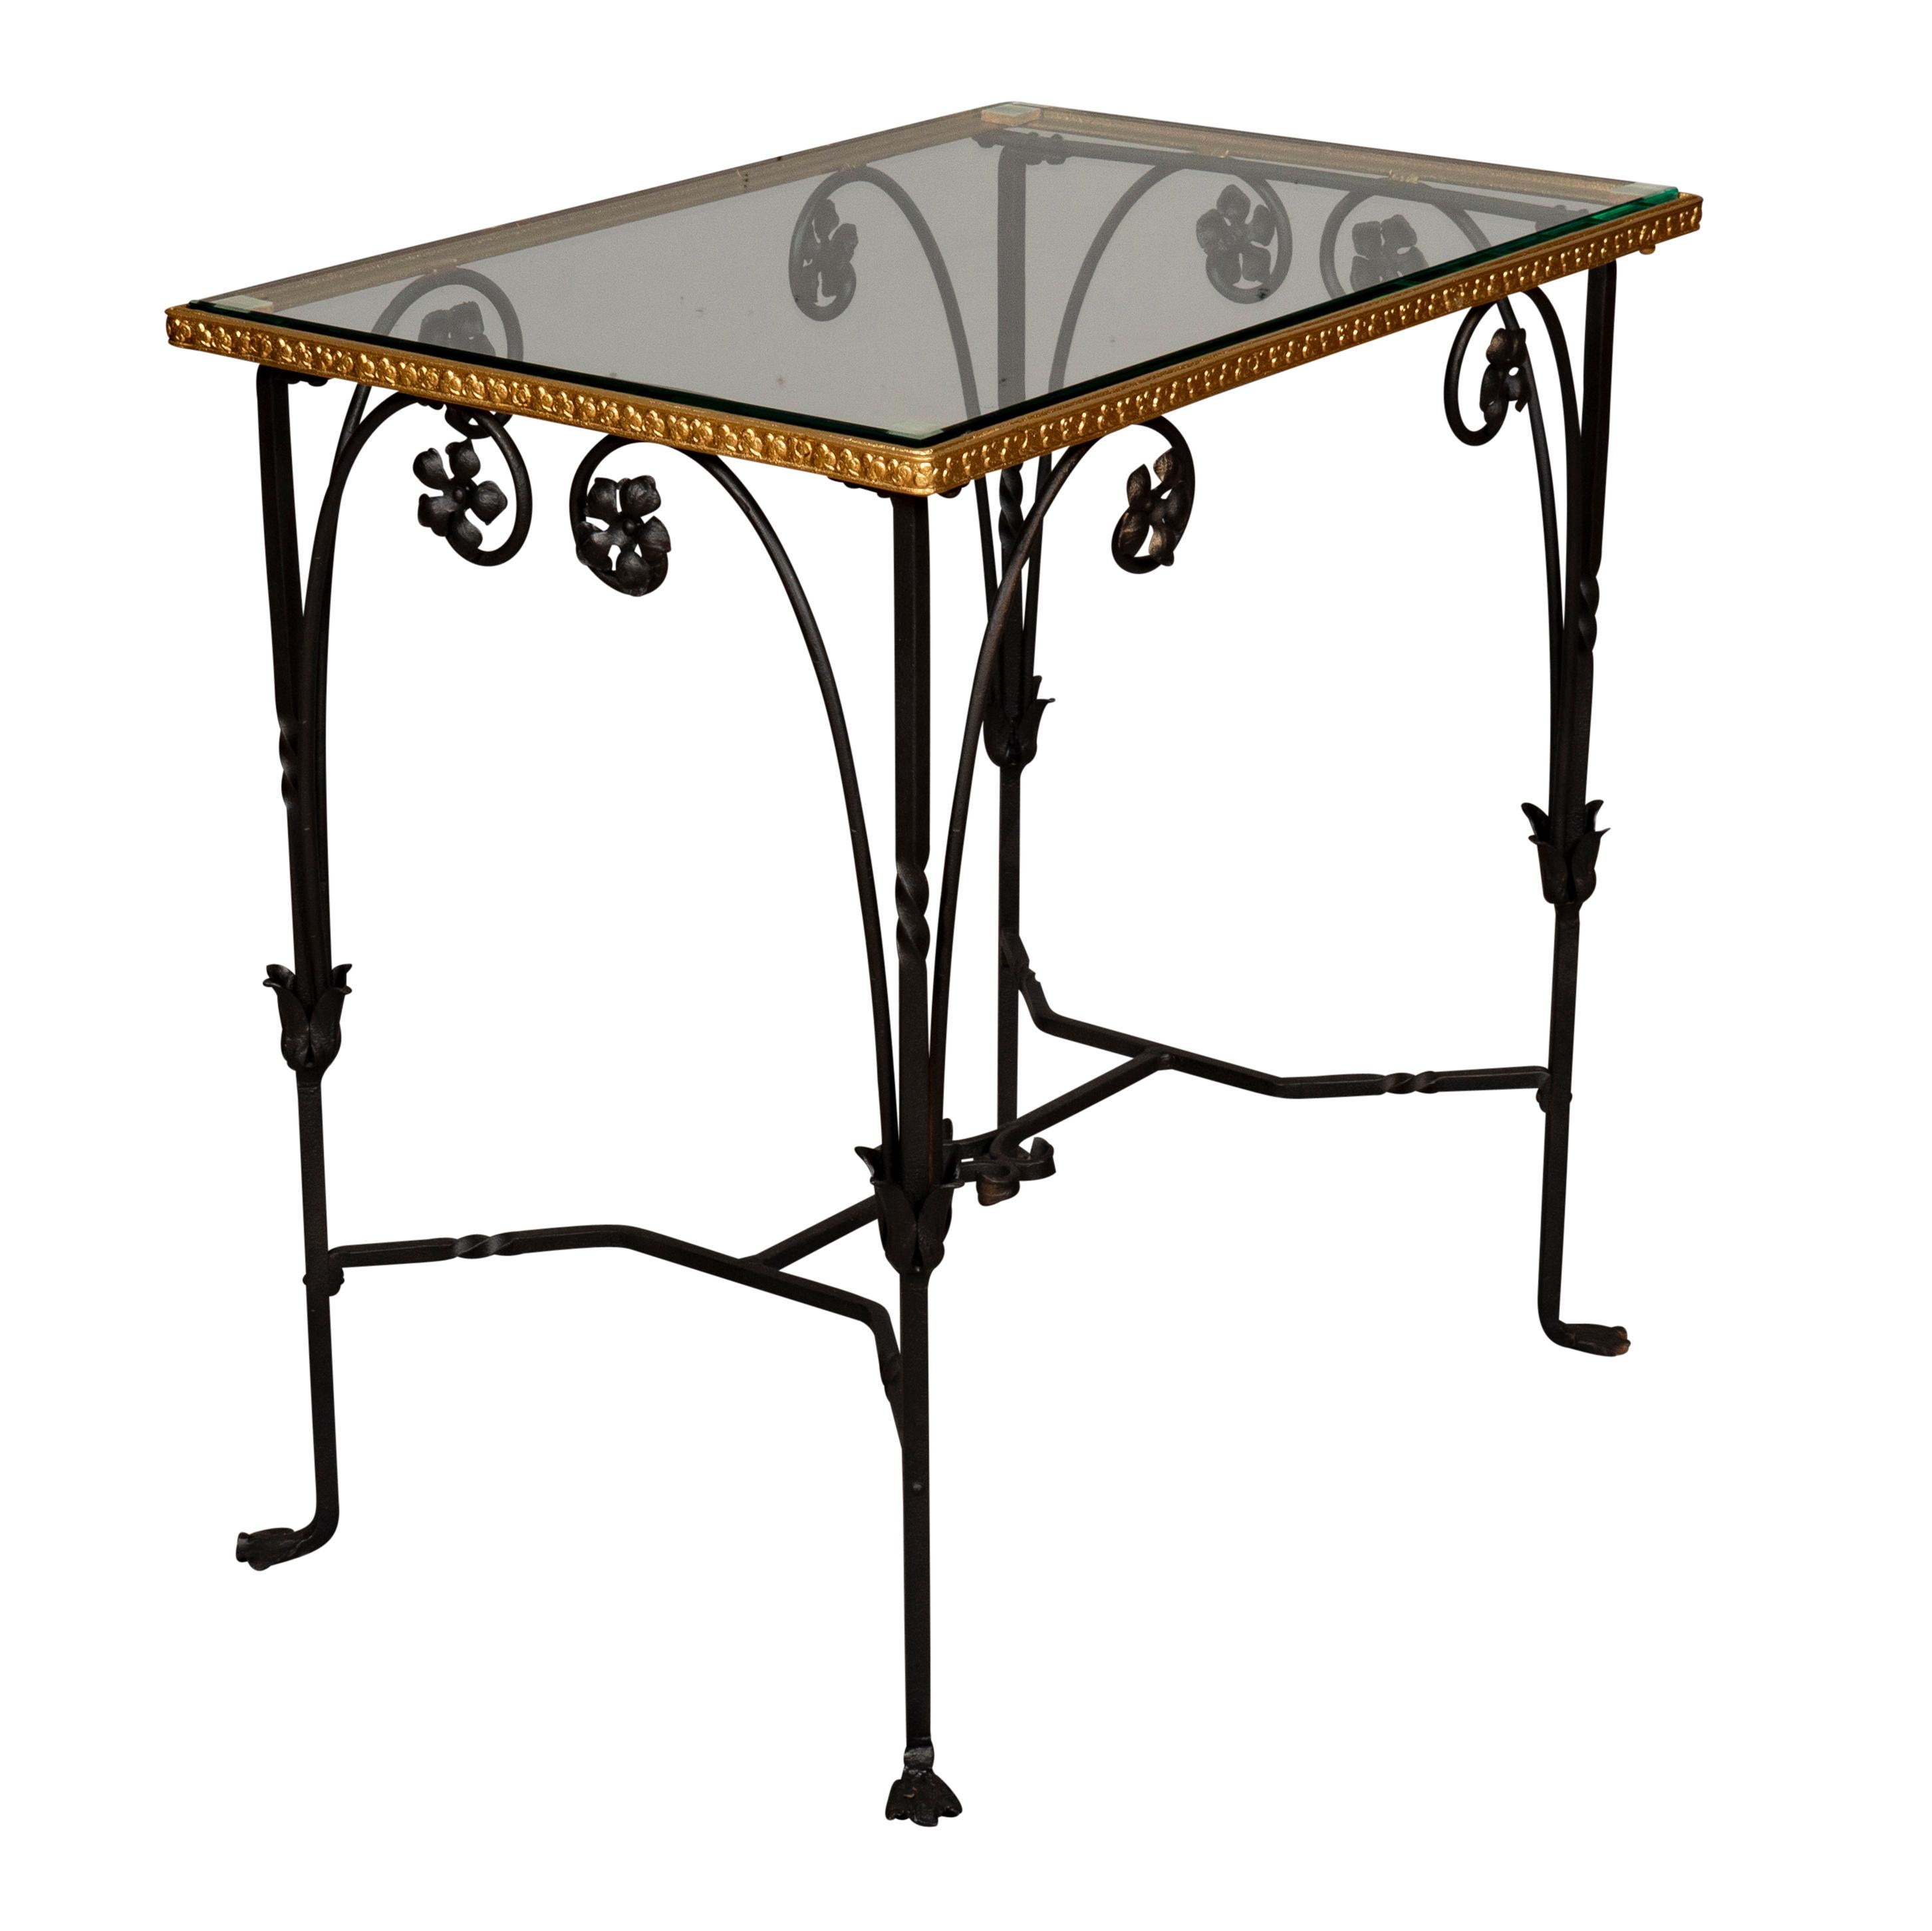 Early 20th Century Arts and Crafts Wrought Iron Table